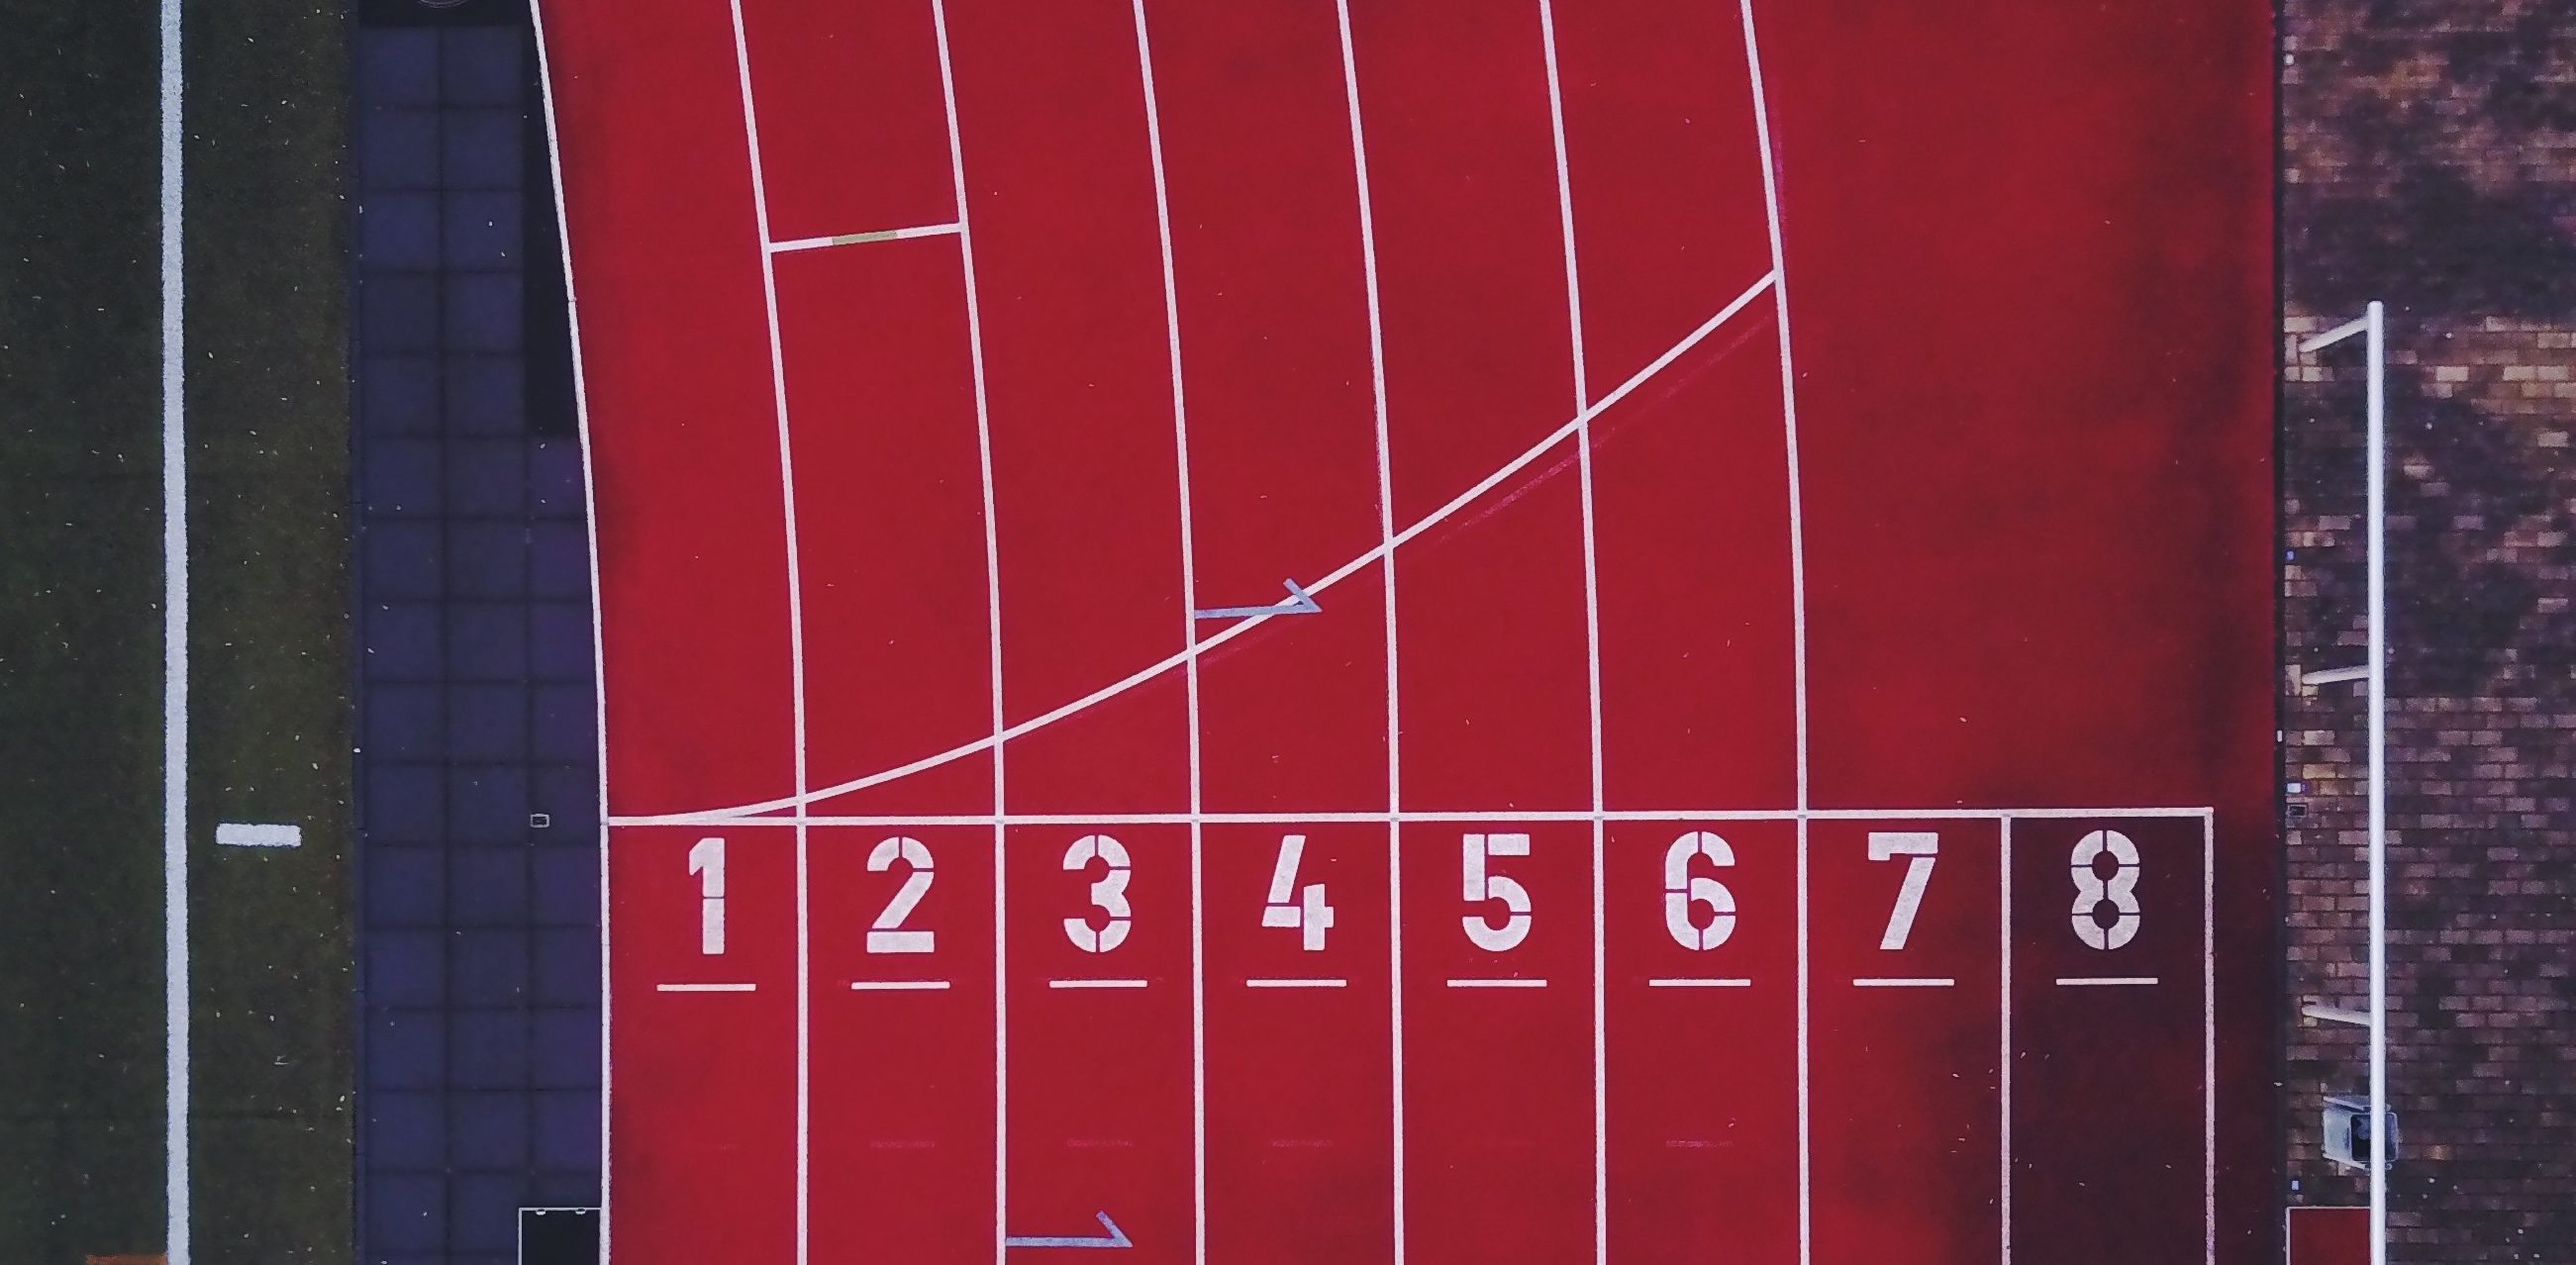 Top-down photo of the numbered lanes on a running track